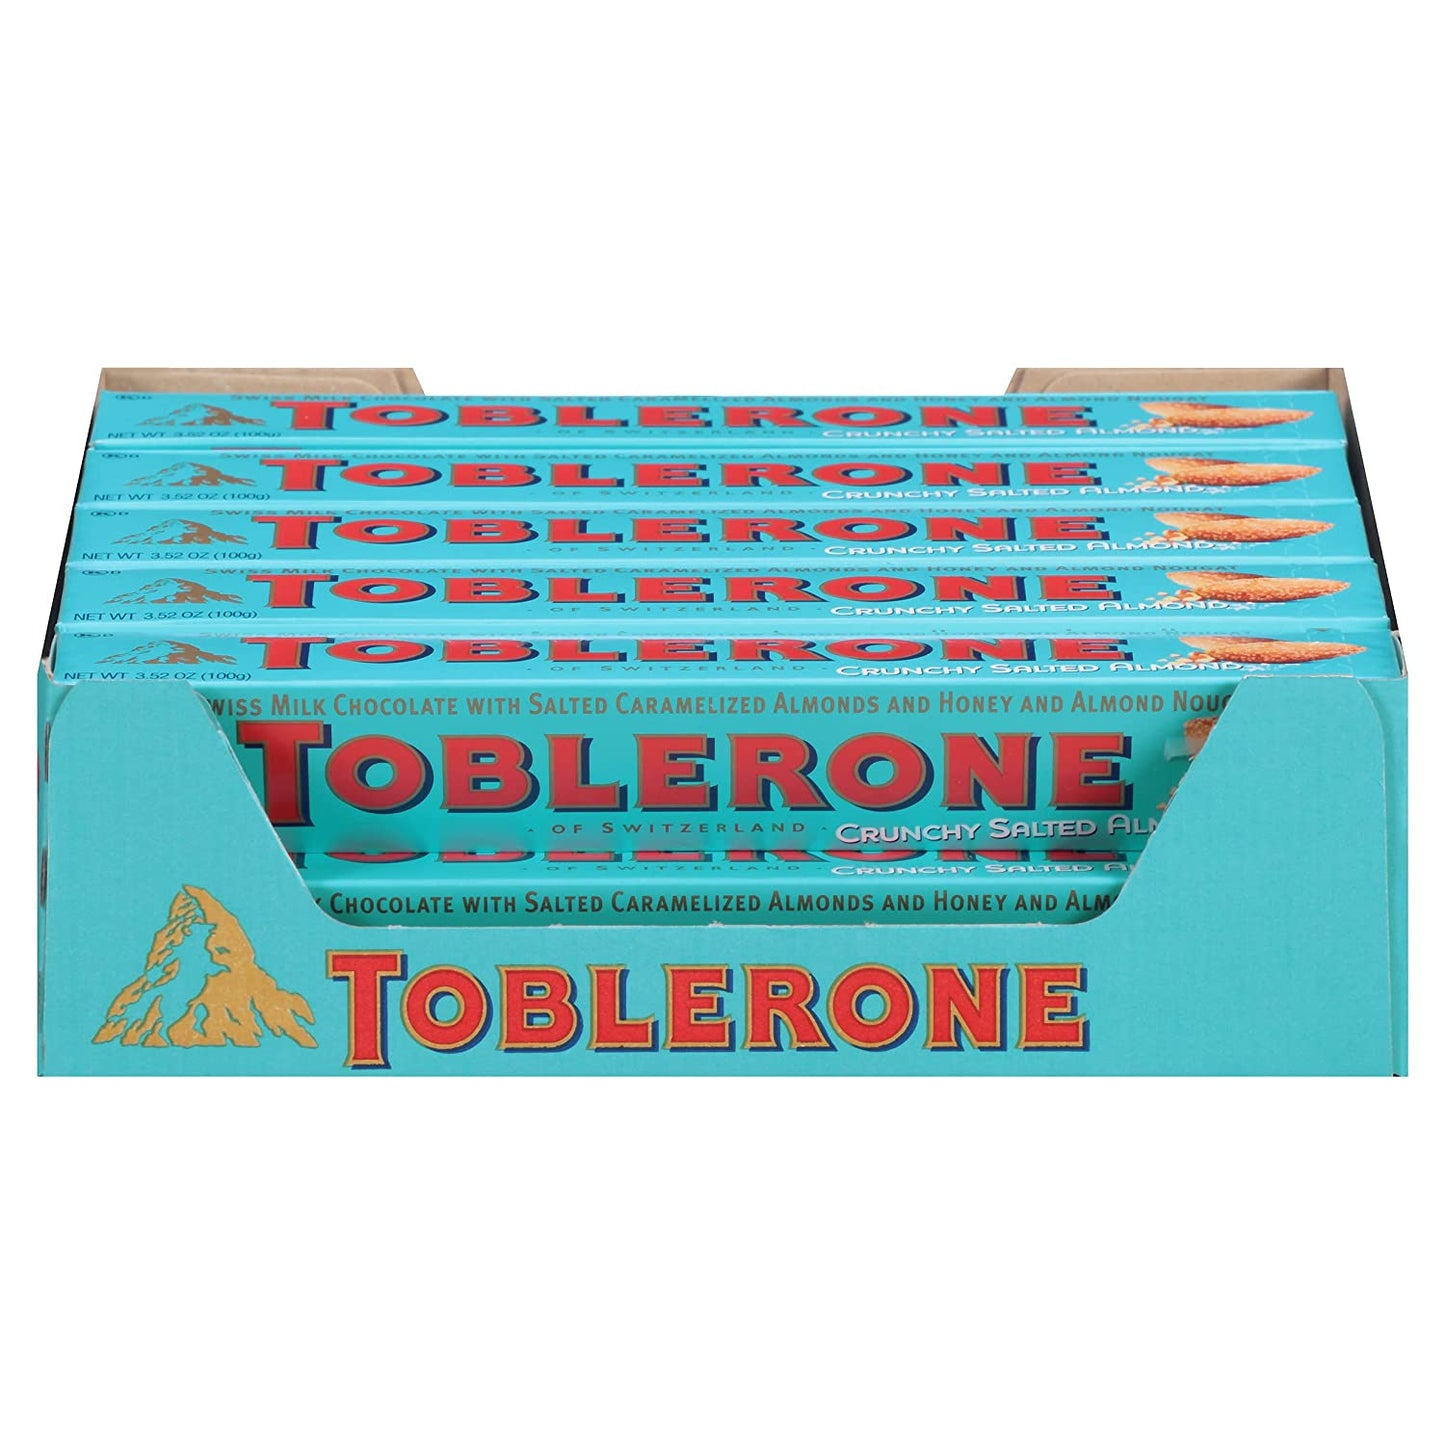 Toblerone Swiss Milk Chocolate with Salted Caramelized Almonds & Honey & Almond Nougat, Easter Chocolate, 20 - 3.52 oz Bars